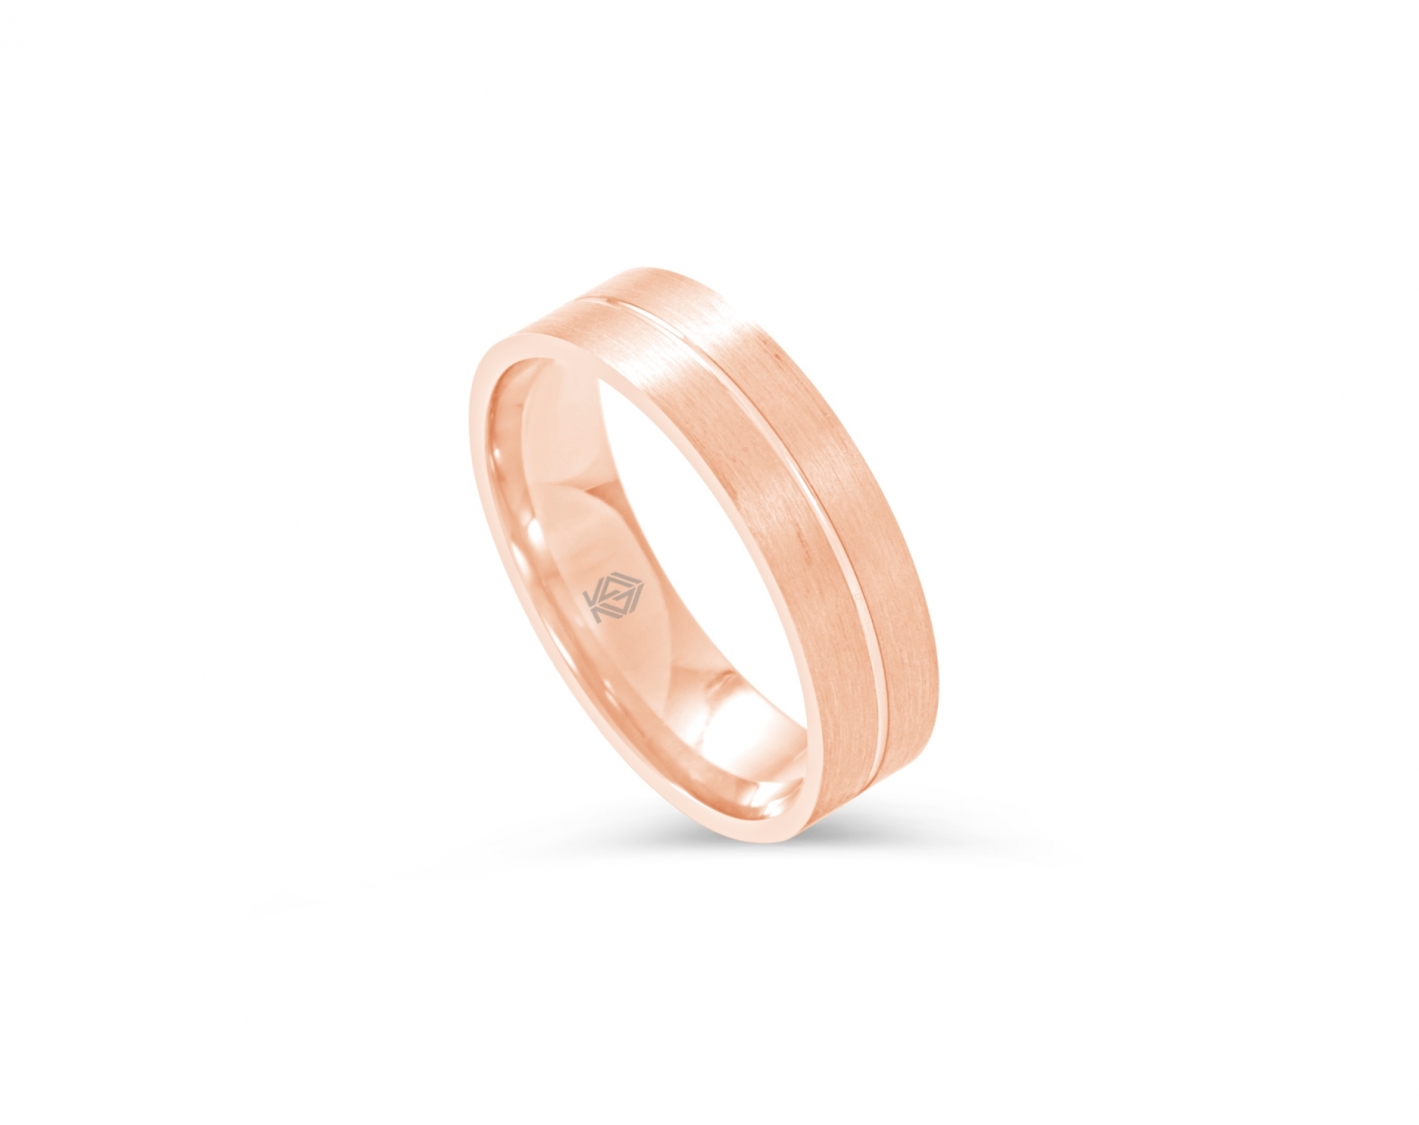 18k rose gold 6mm matte wedding band with a shiny inlay